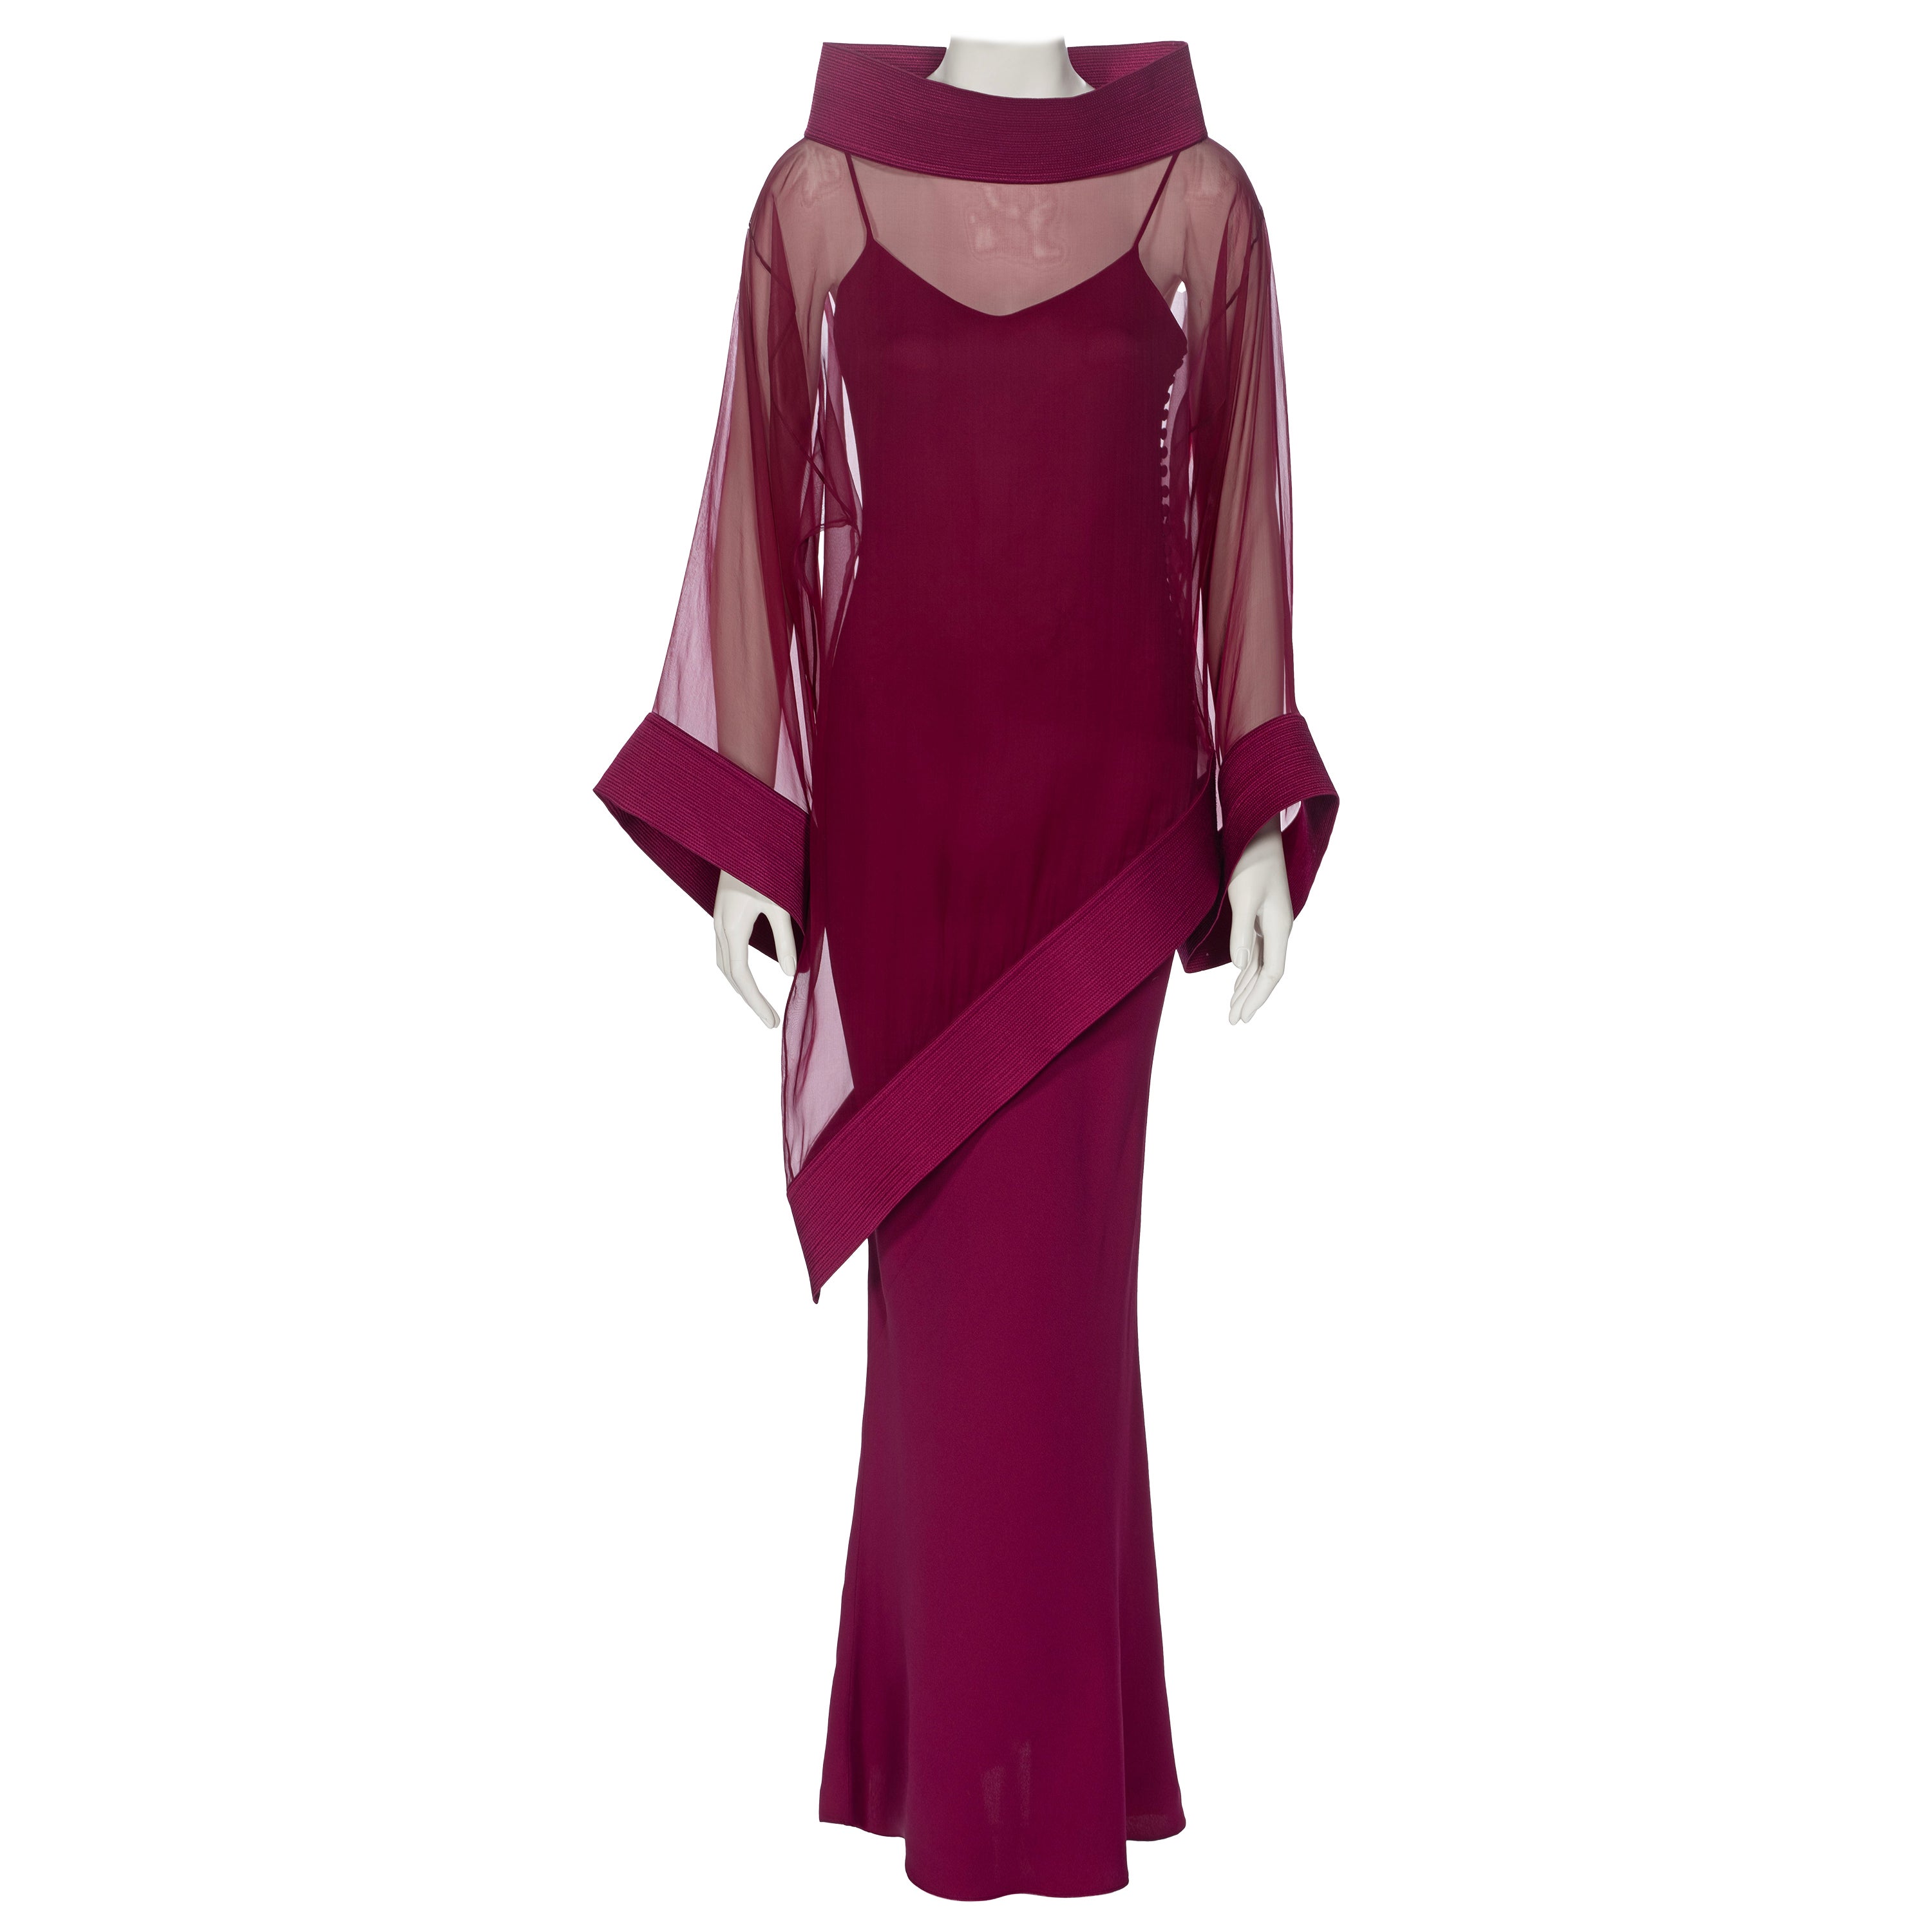 Christian Dior by John Galliano Claret Evening Dress and Tunic Ensemble, fw 1999 For Sale